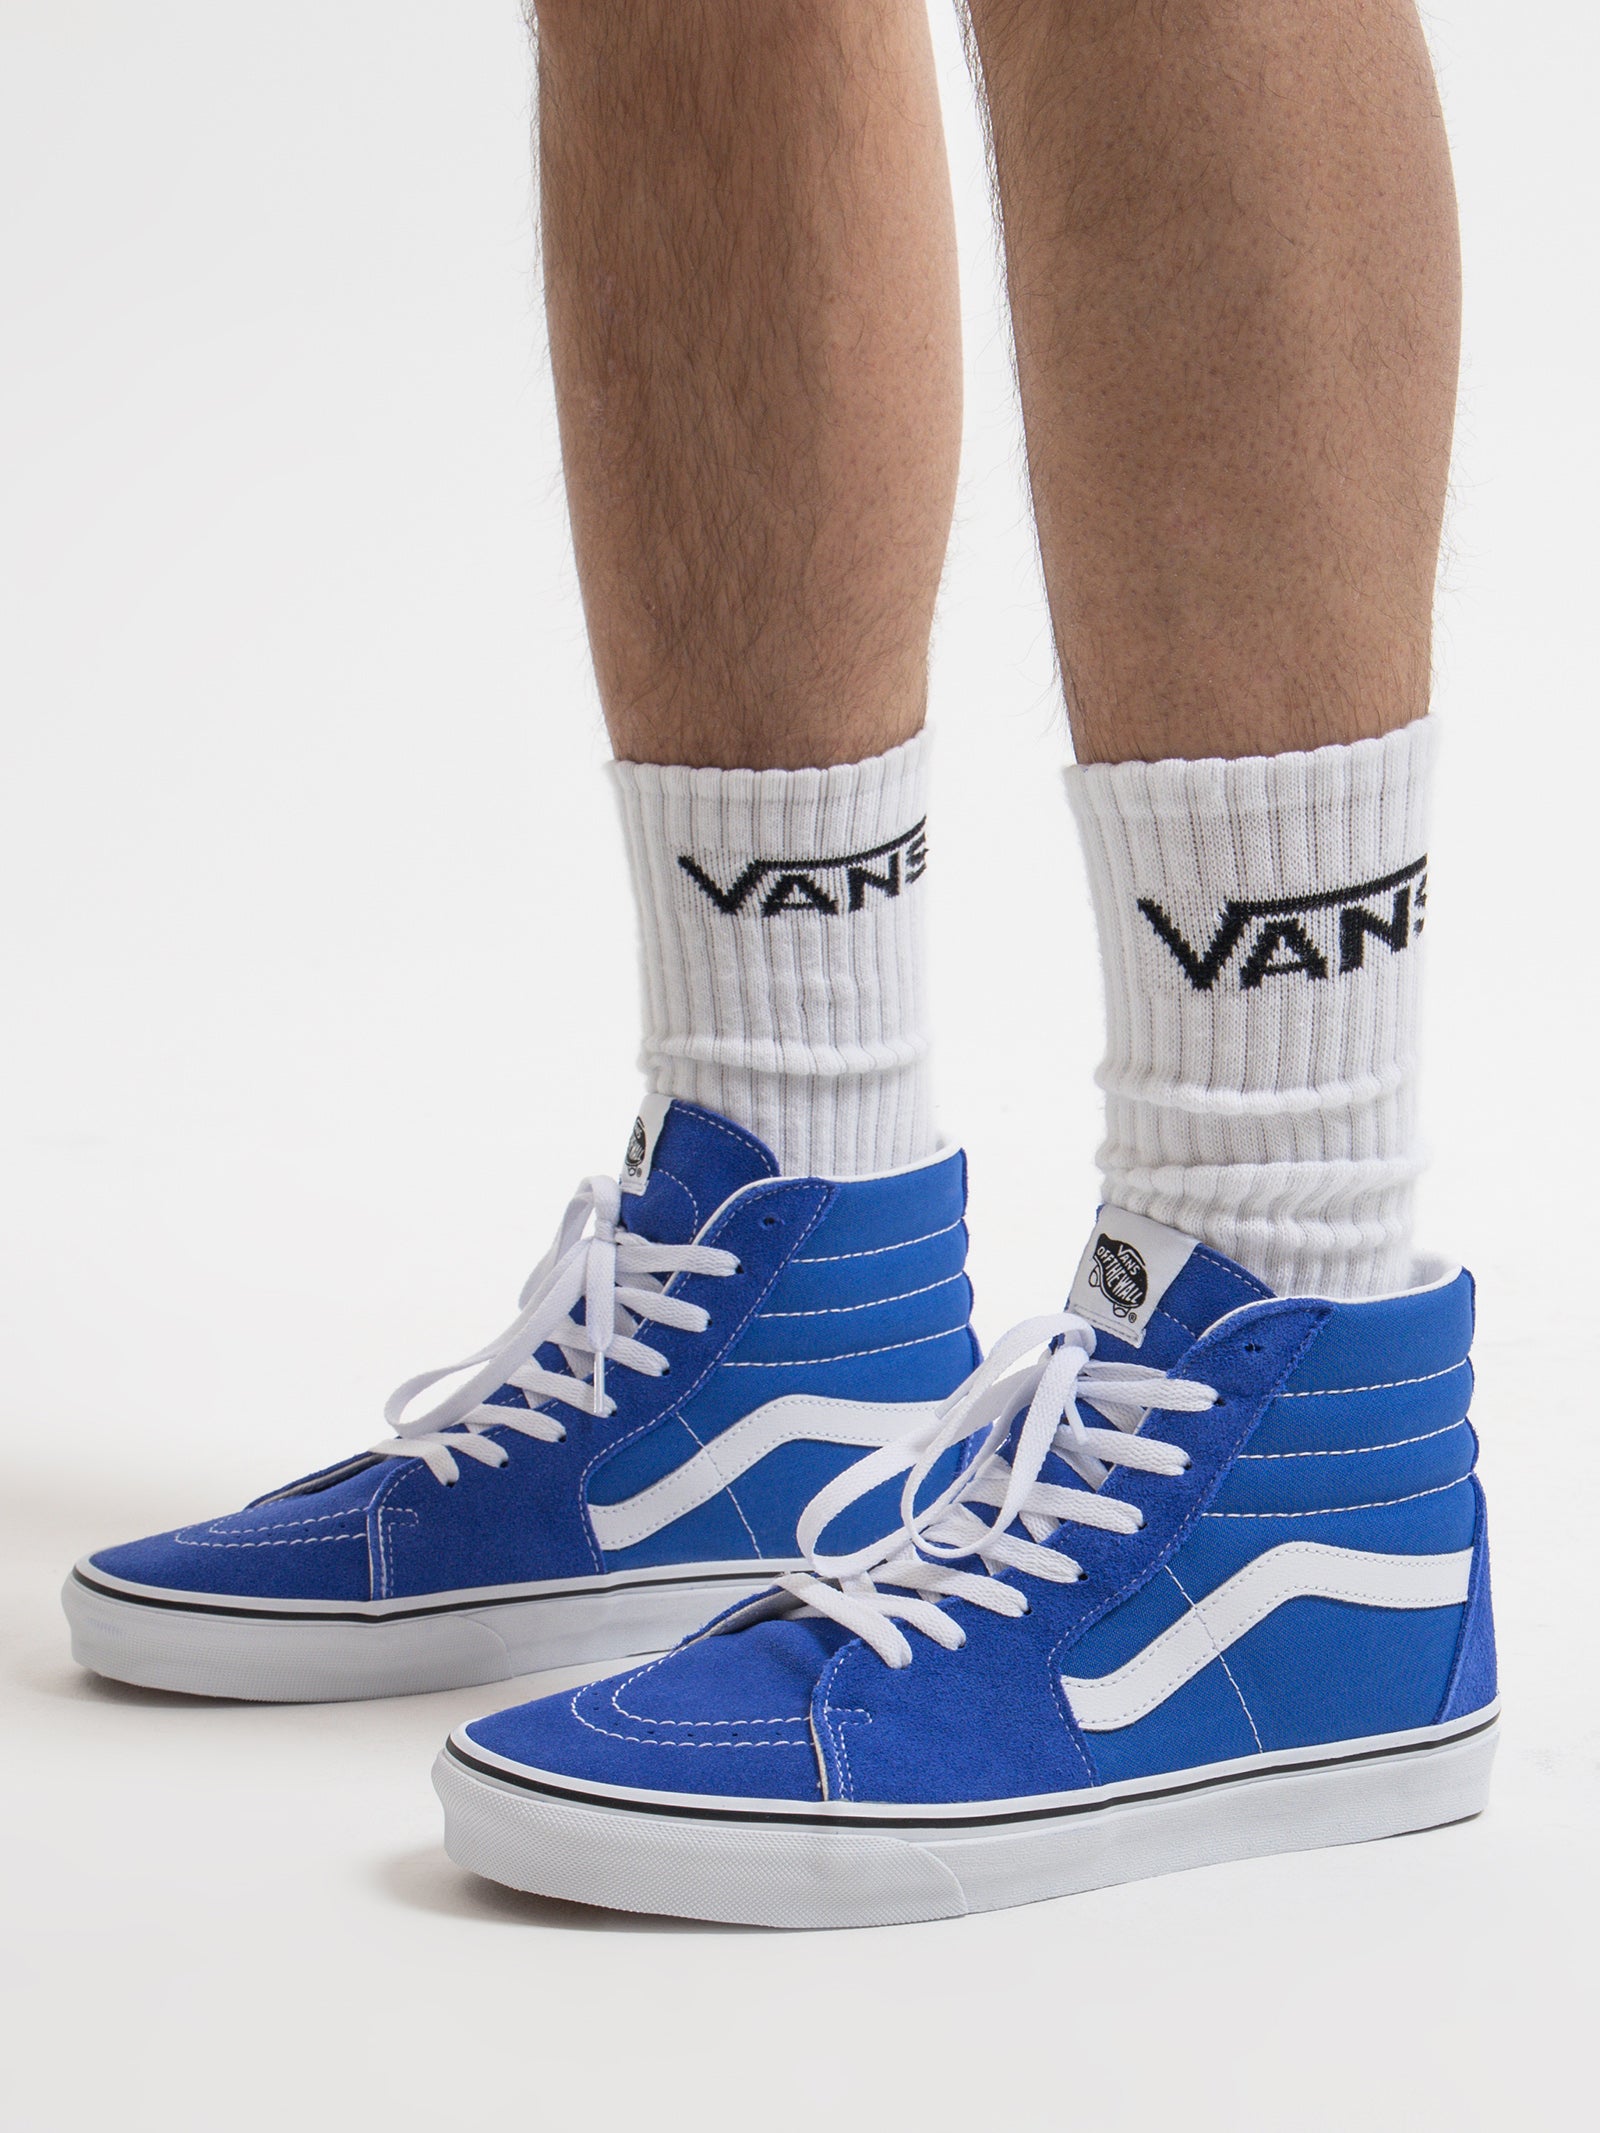 Unisex Sk8-Hi Colour Theory Sneakers in Dazzling Blue